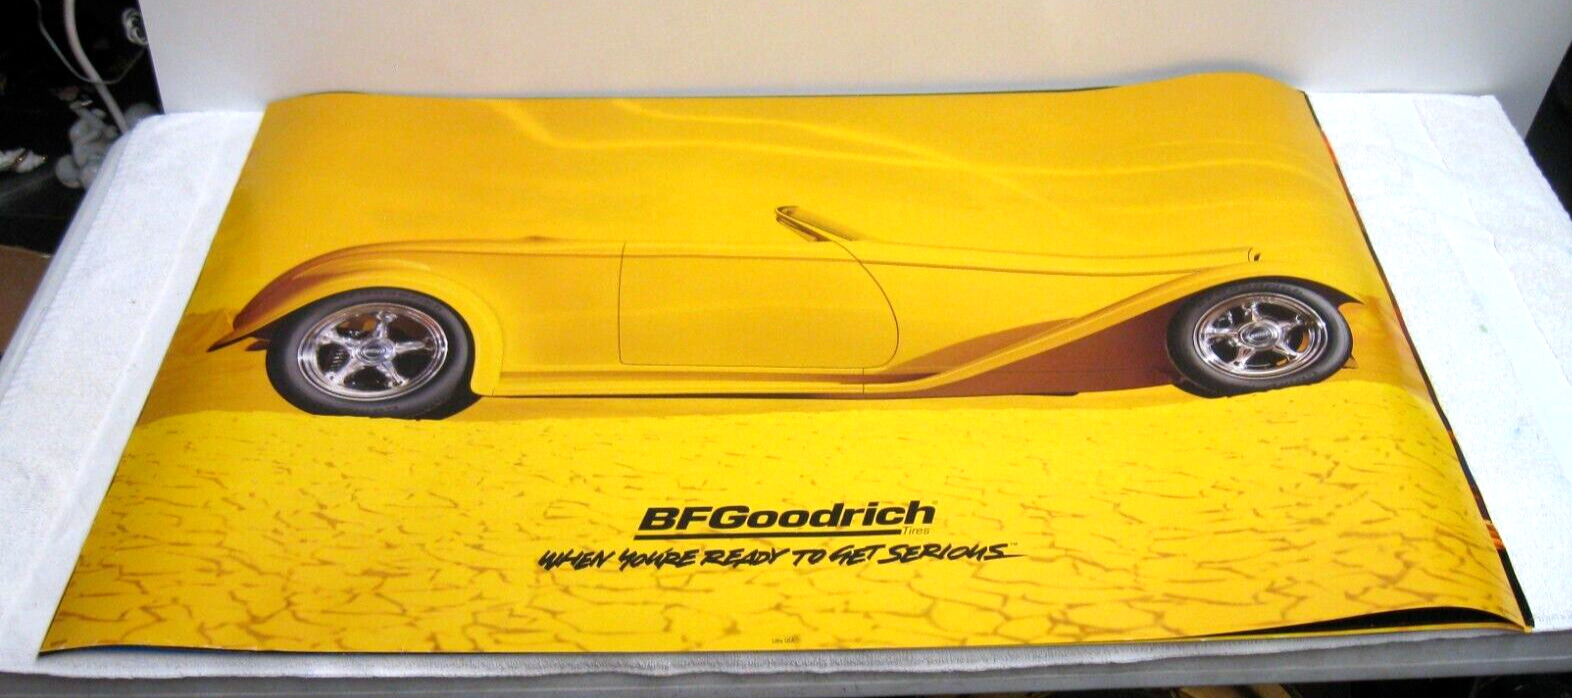 BF GOODRICH SIGN 1932 FORD YELLOW HOT ROD MAN CAVE POSTER 24X36